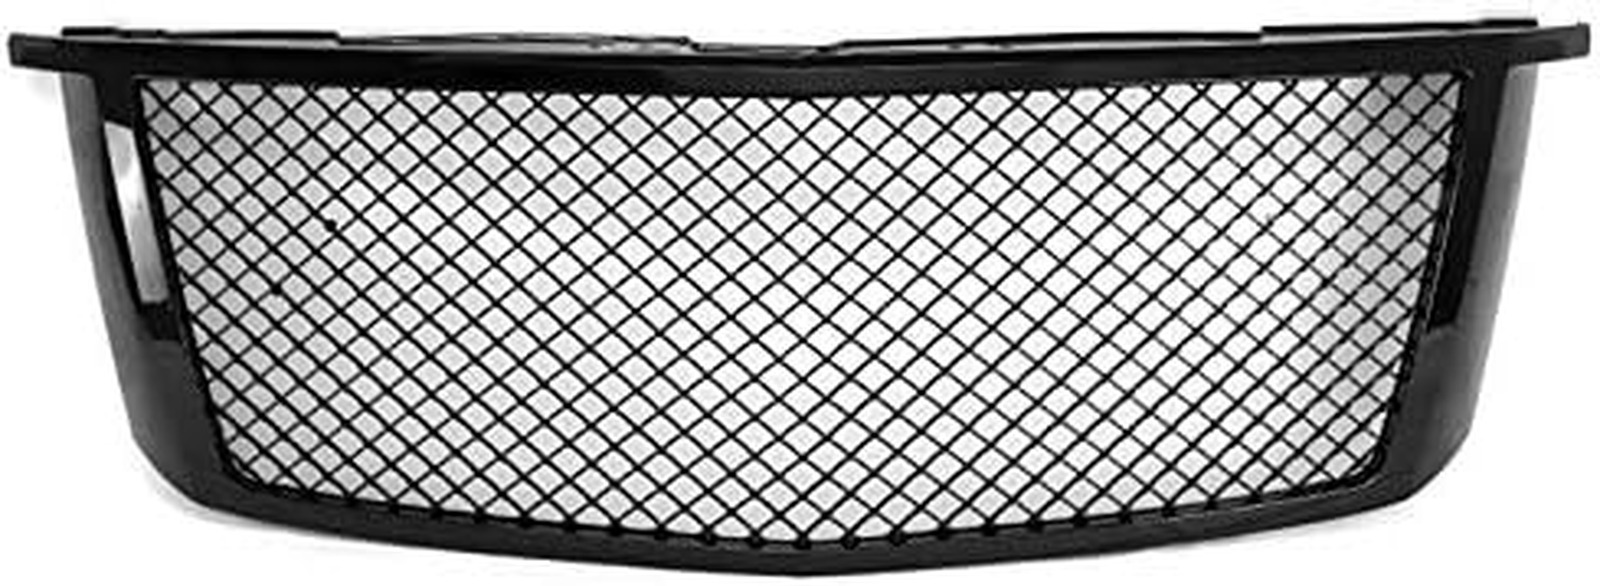 Mesh Style Front Upper Hood Grille Grill Gloss Black for 2015-2020 Chevy Suburba